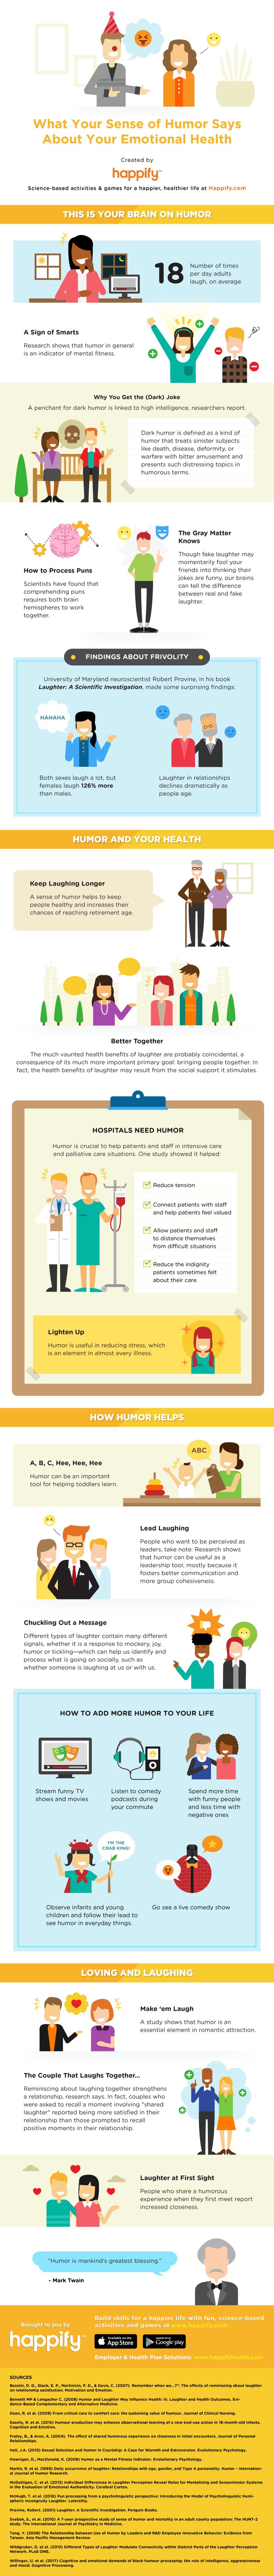 Psychology-Infographic-What-Your-Sense-of-Humor-Says-About-Your-Emotional-Health-infographic-from-Hap Psychology Infographic : "What Your Sense of Humor Says About Your Emotional Health" infographic from Hap...